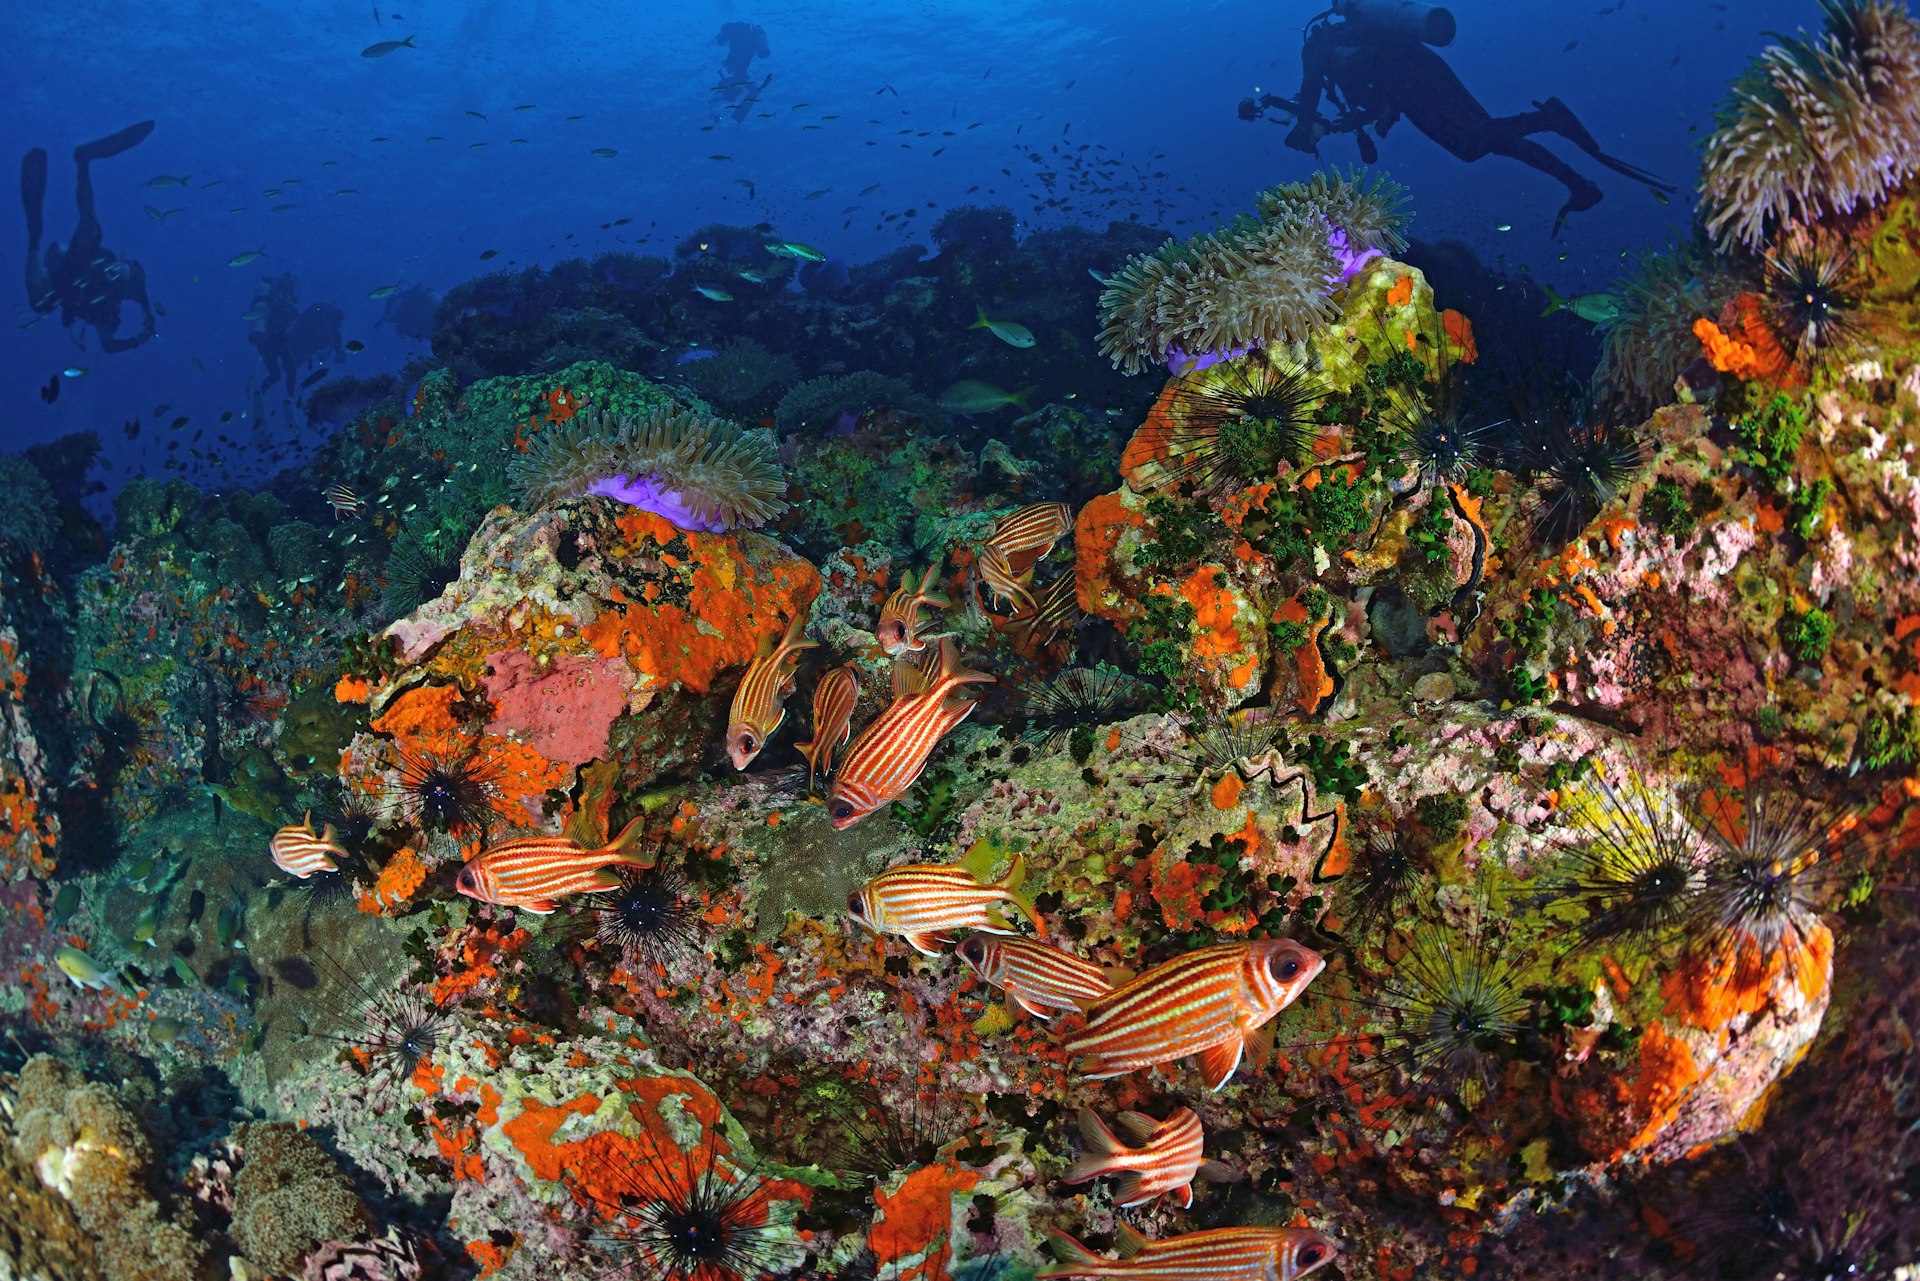 Divers explore the vibrant fish life and coral in Koh Tao